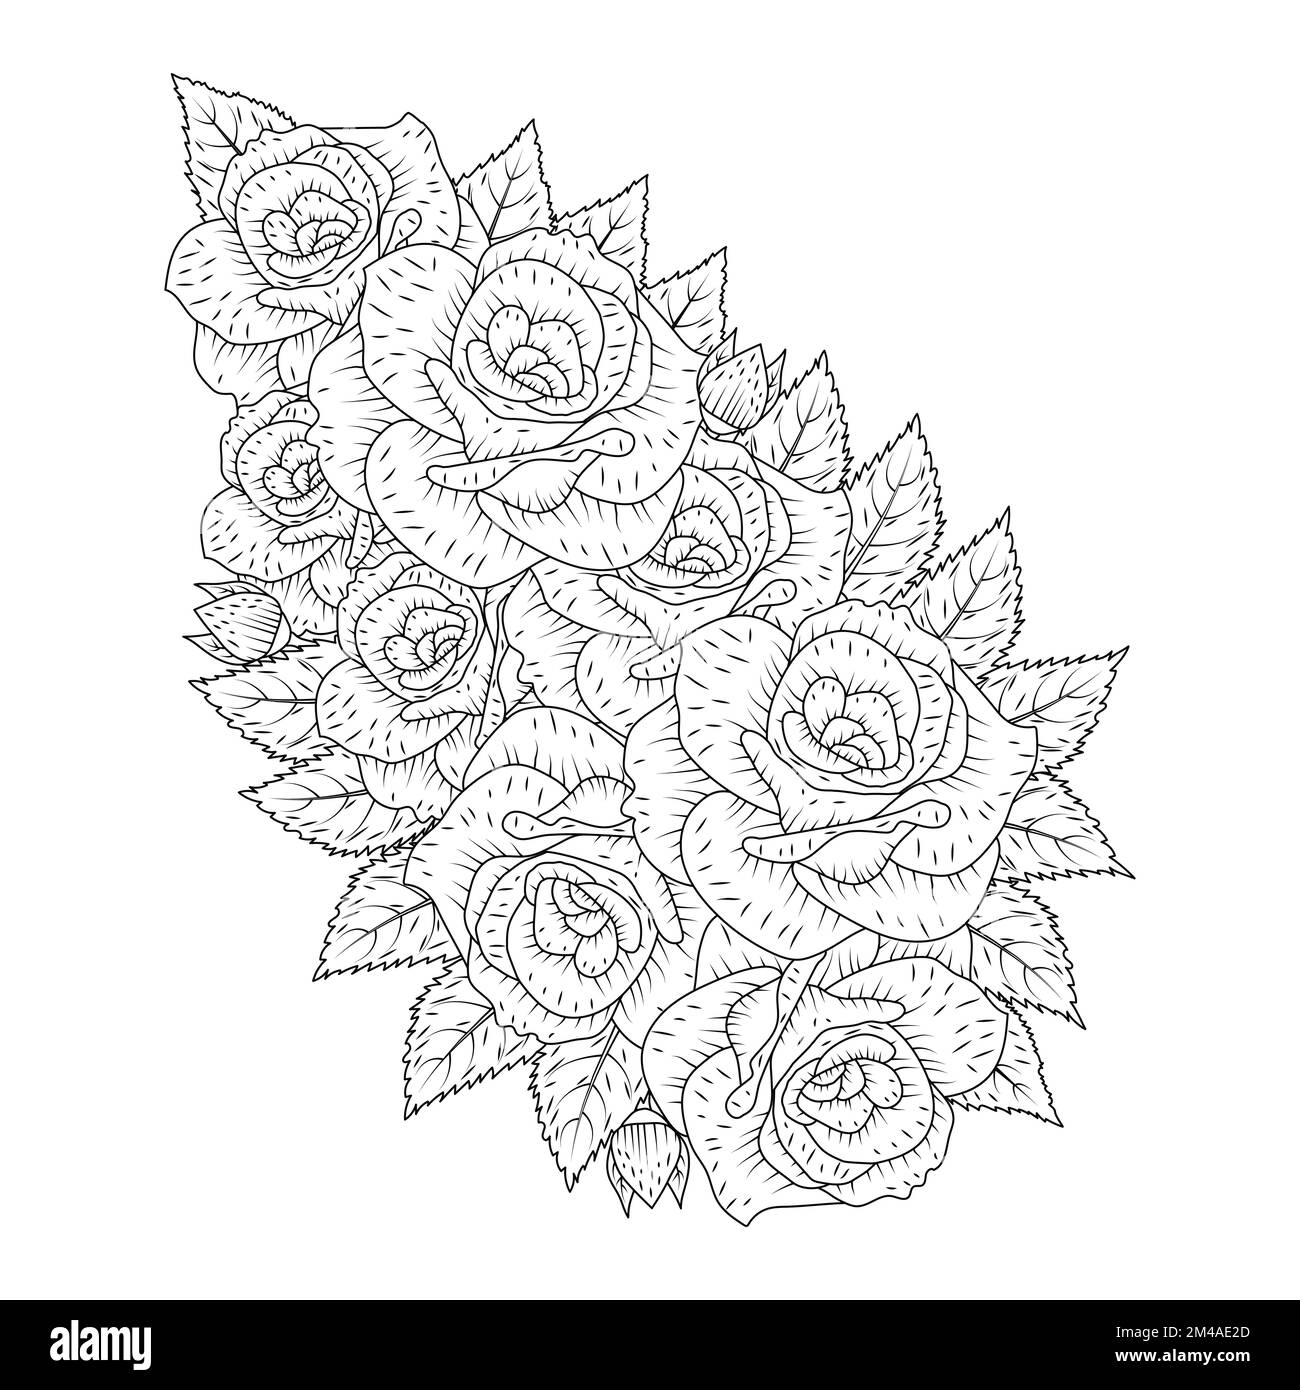 rose flower coloring page dot line art with doodle style adult coloring book illustration Stock Vector